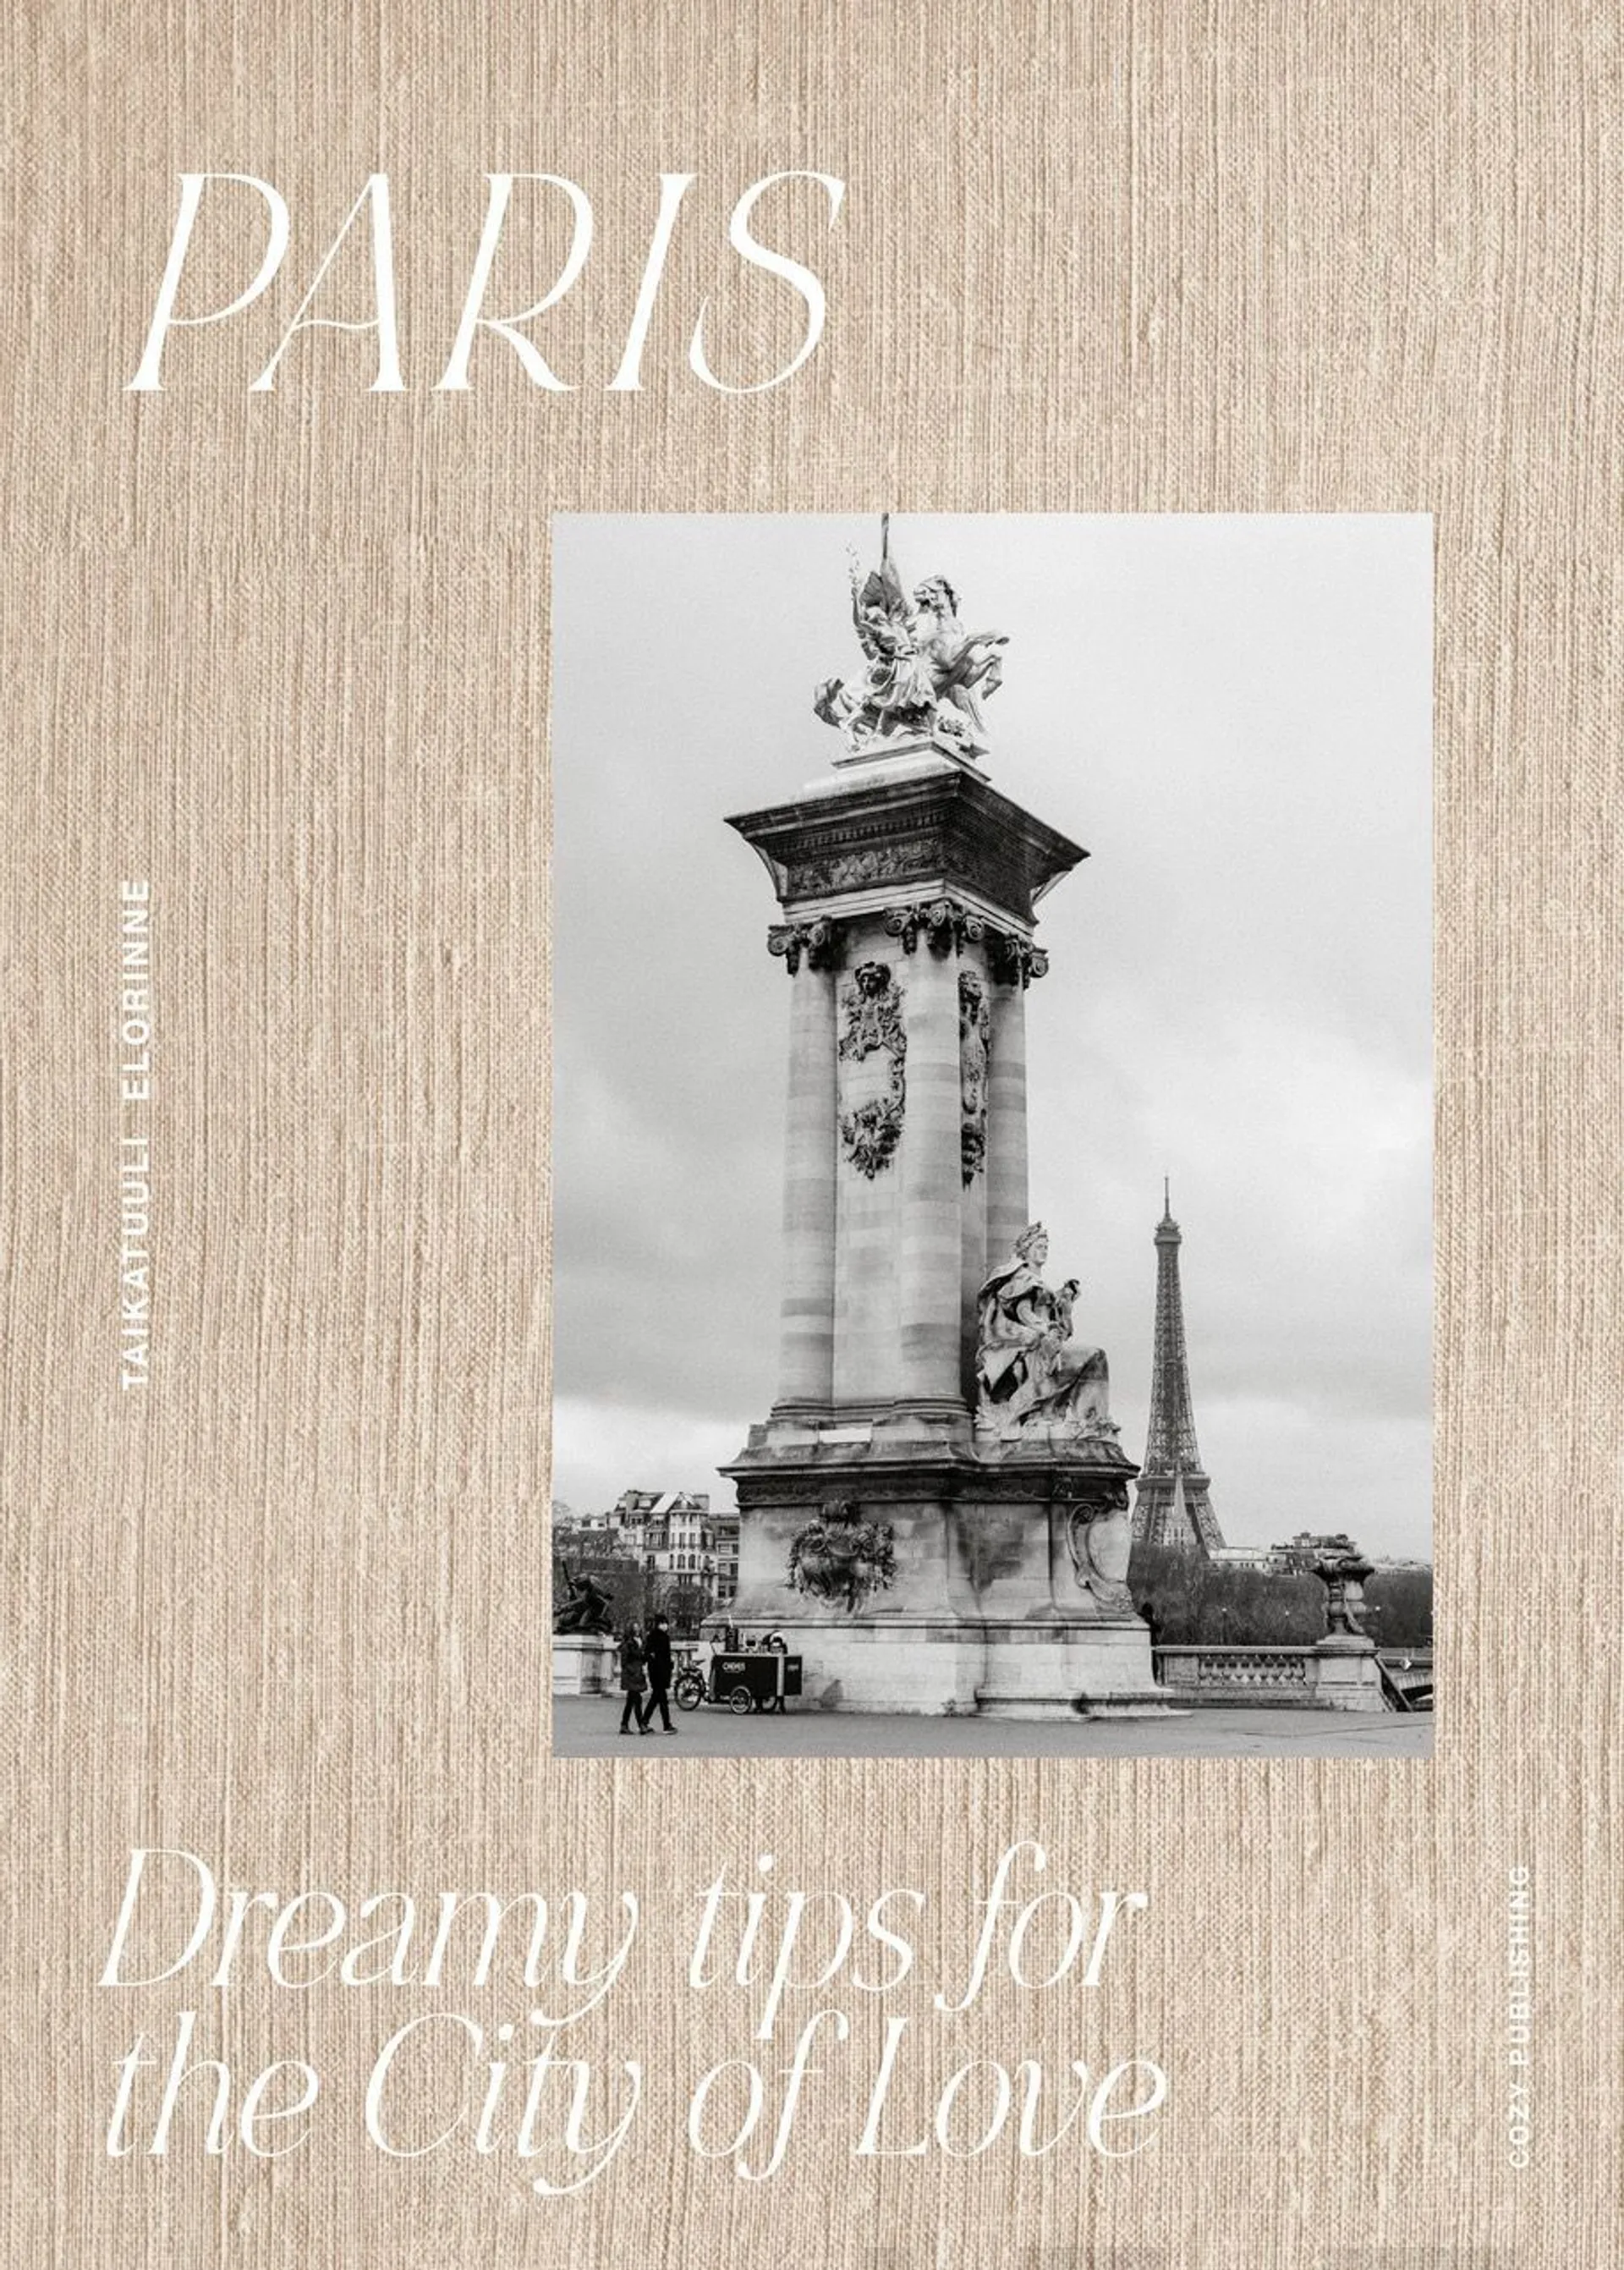 Elorinne, Paris - Dreamy tips for the City of Love